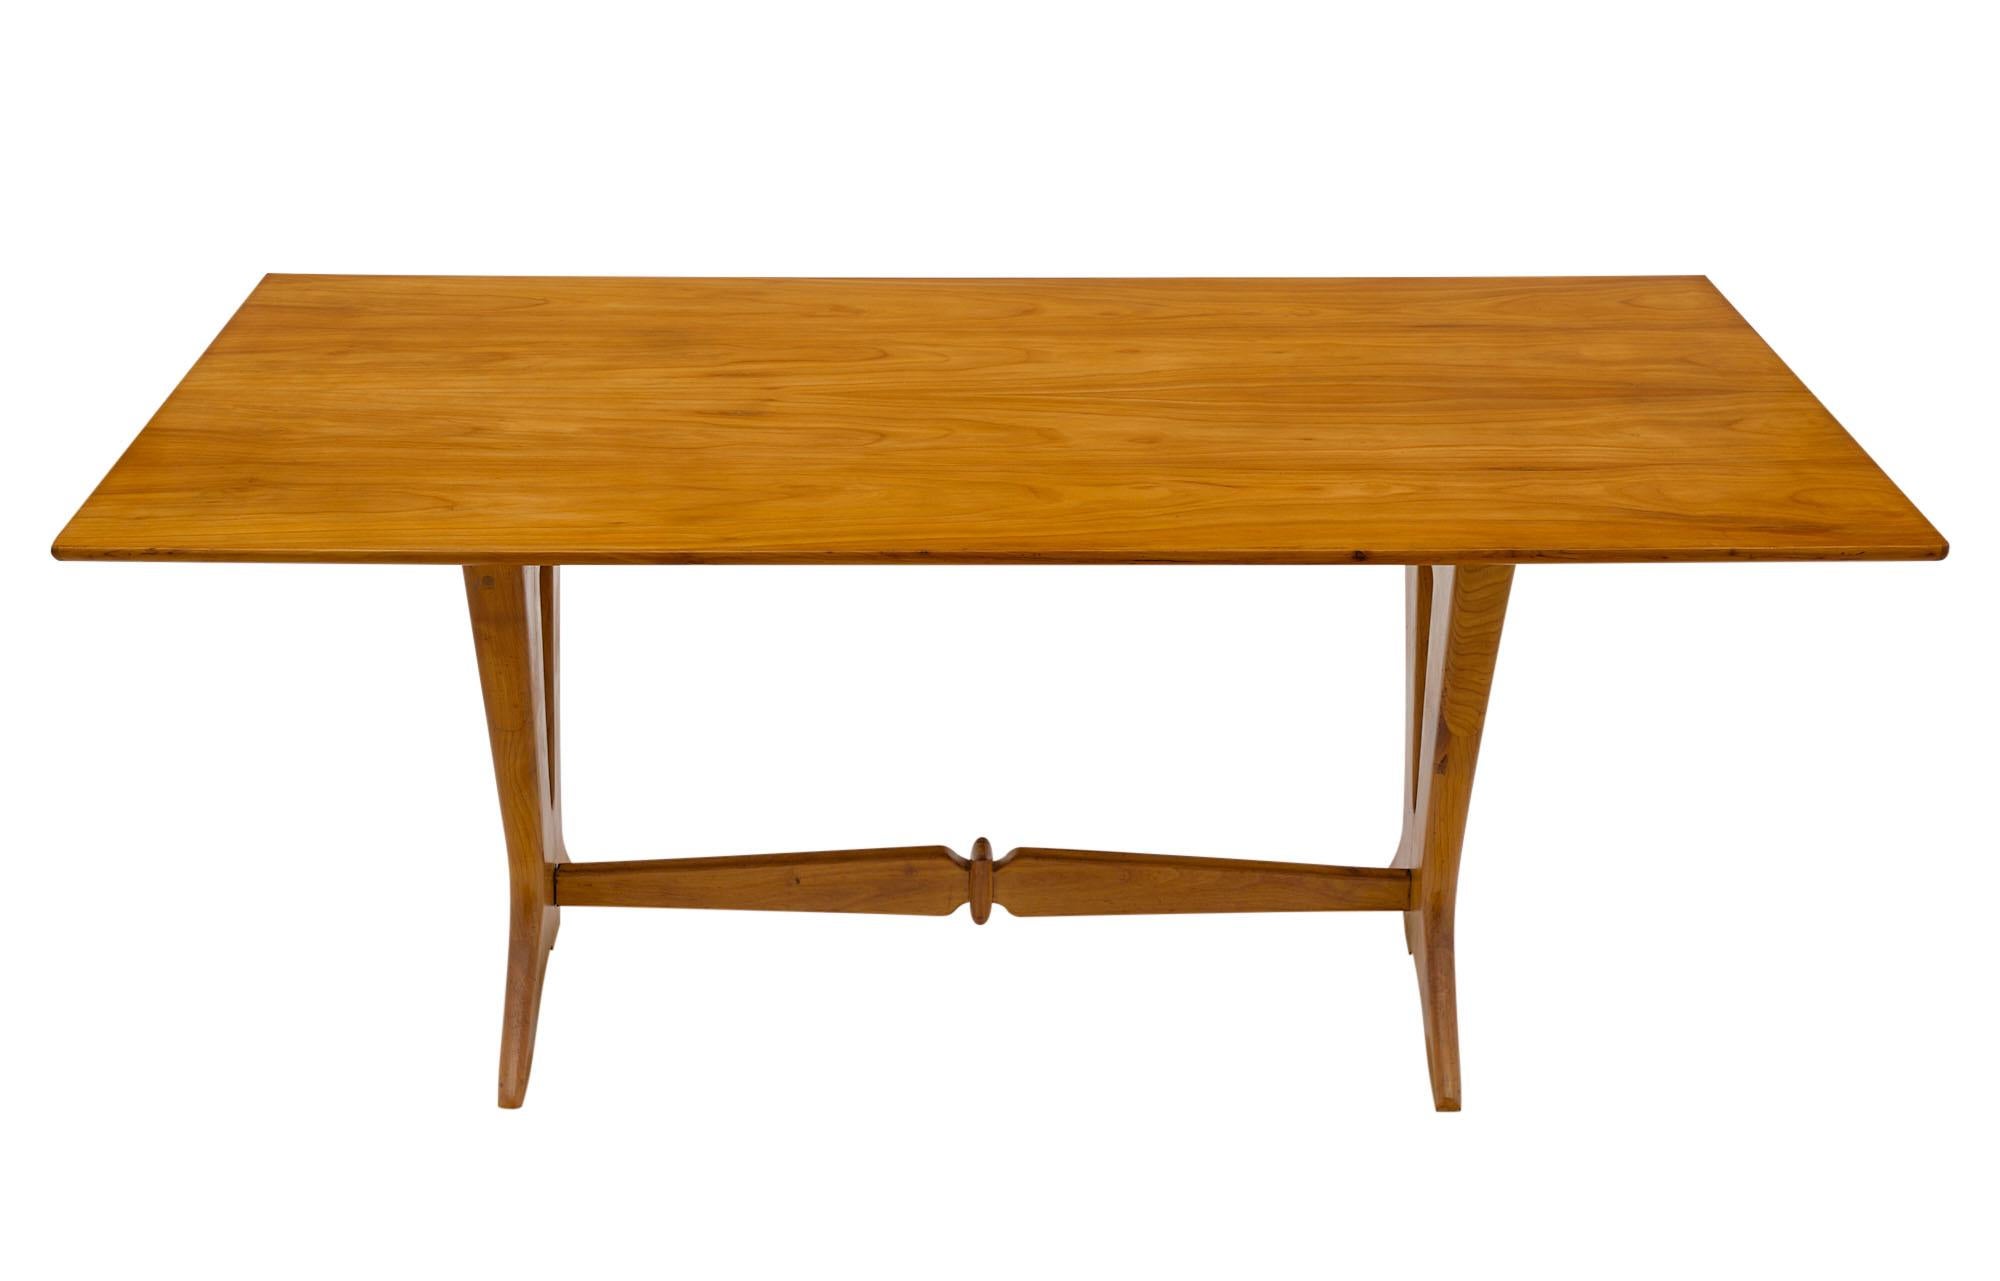 Cesare Lacca style Italian dining table made of beech wood and finished with a French polish.3.